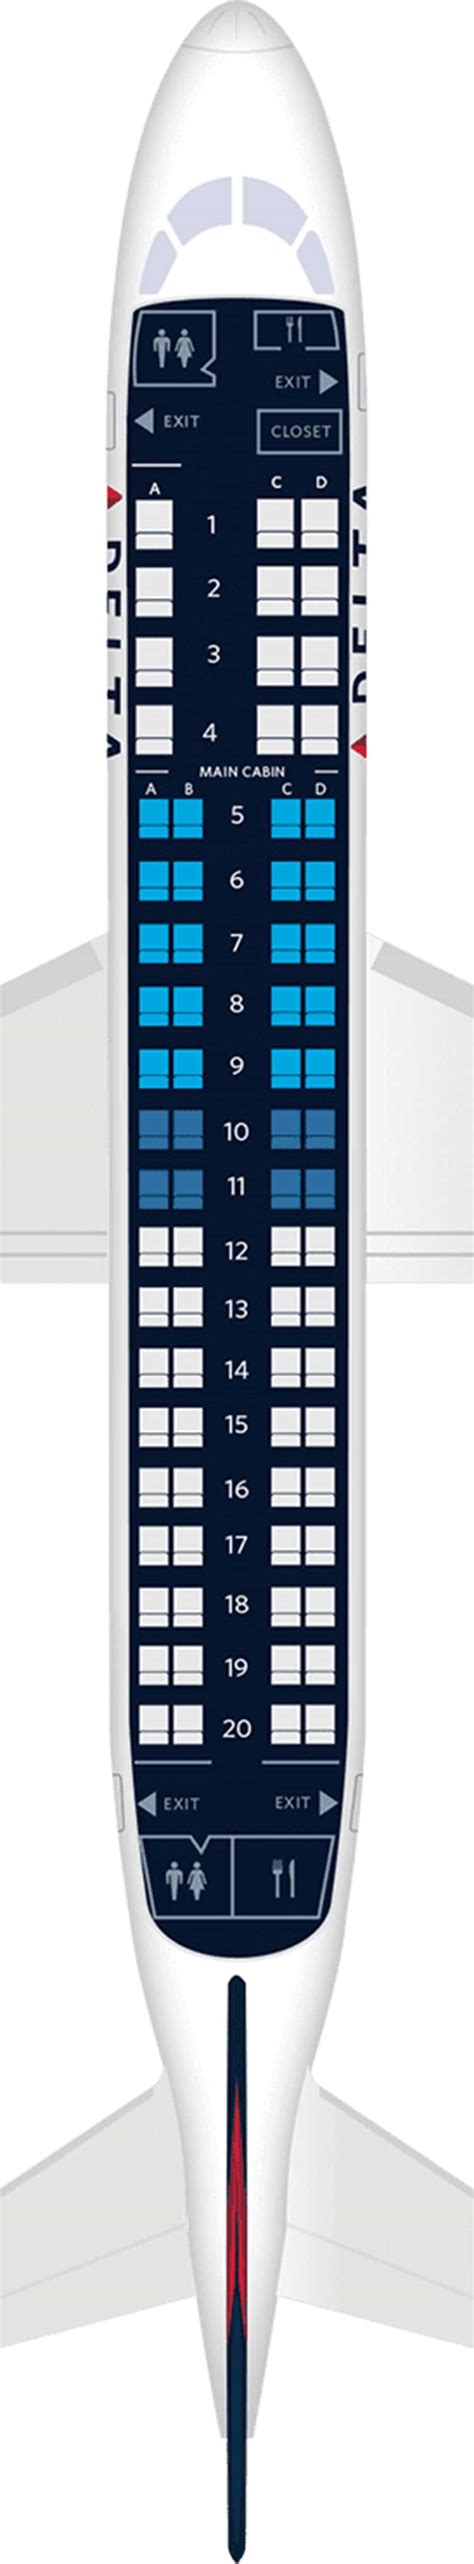 The United Embraer ERJ 175 seating chart includes three cabin classes: Economy, Economy Plus, and Business. Economy is the most affordable option, offering a standard seat width of 17 inches and 31 inches of pitch. Economy Plus provides additional legroom and wider seats (18.5 inches), while Business class offers the most luxurious experience .... 